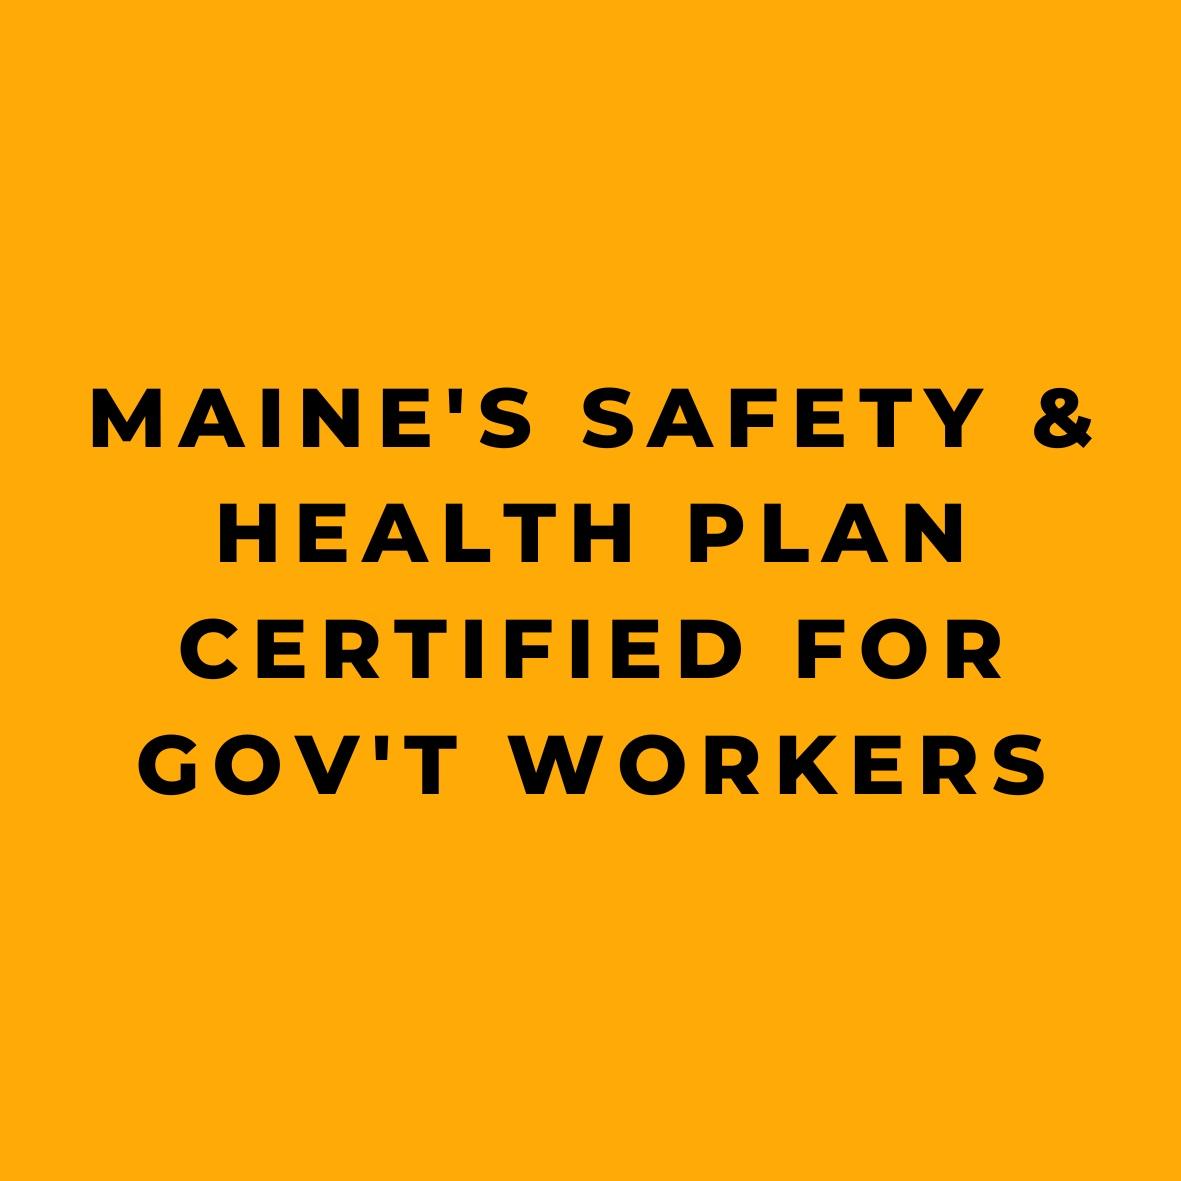 Maine's Safety & Health Plan Certified for Gov't Workers